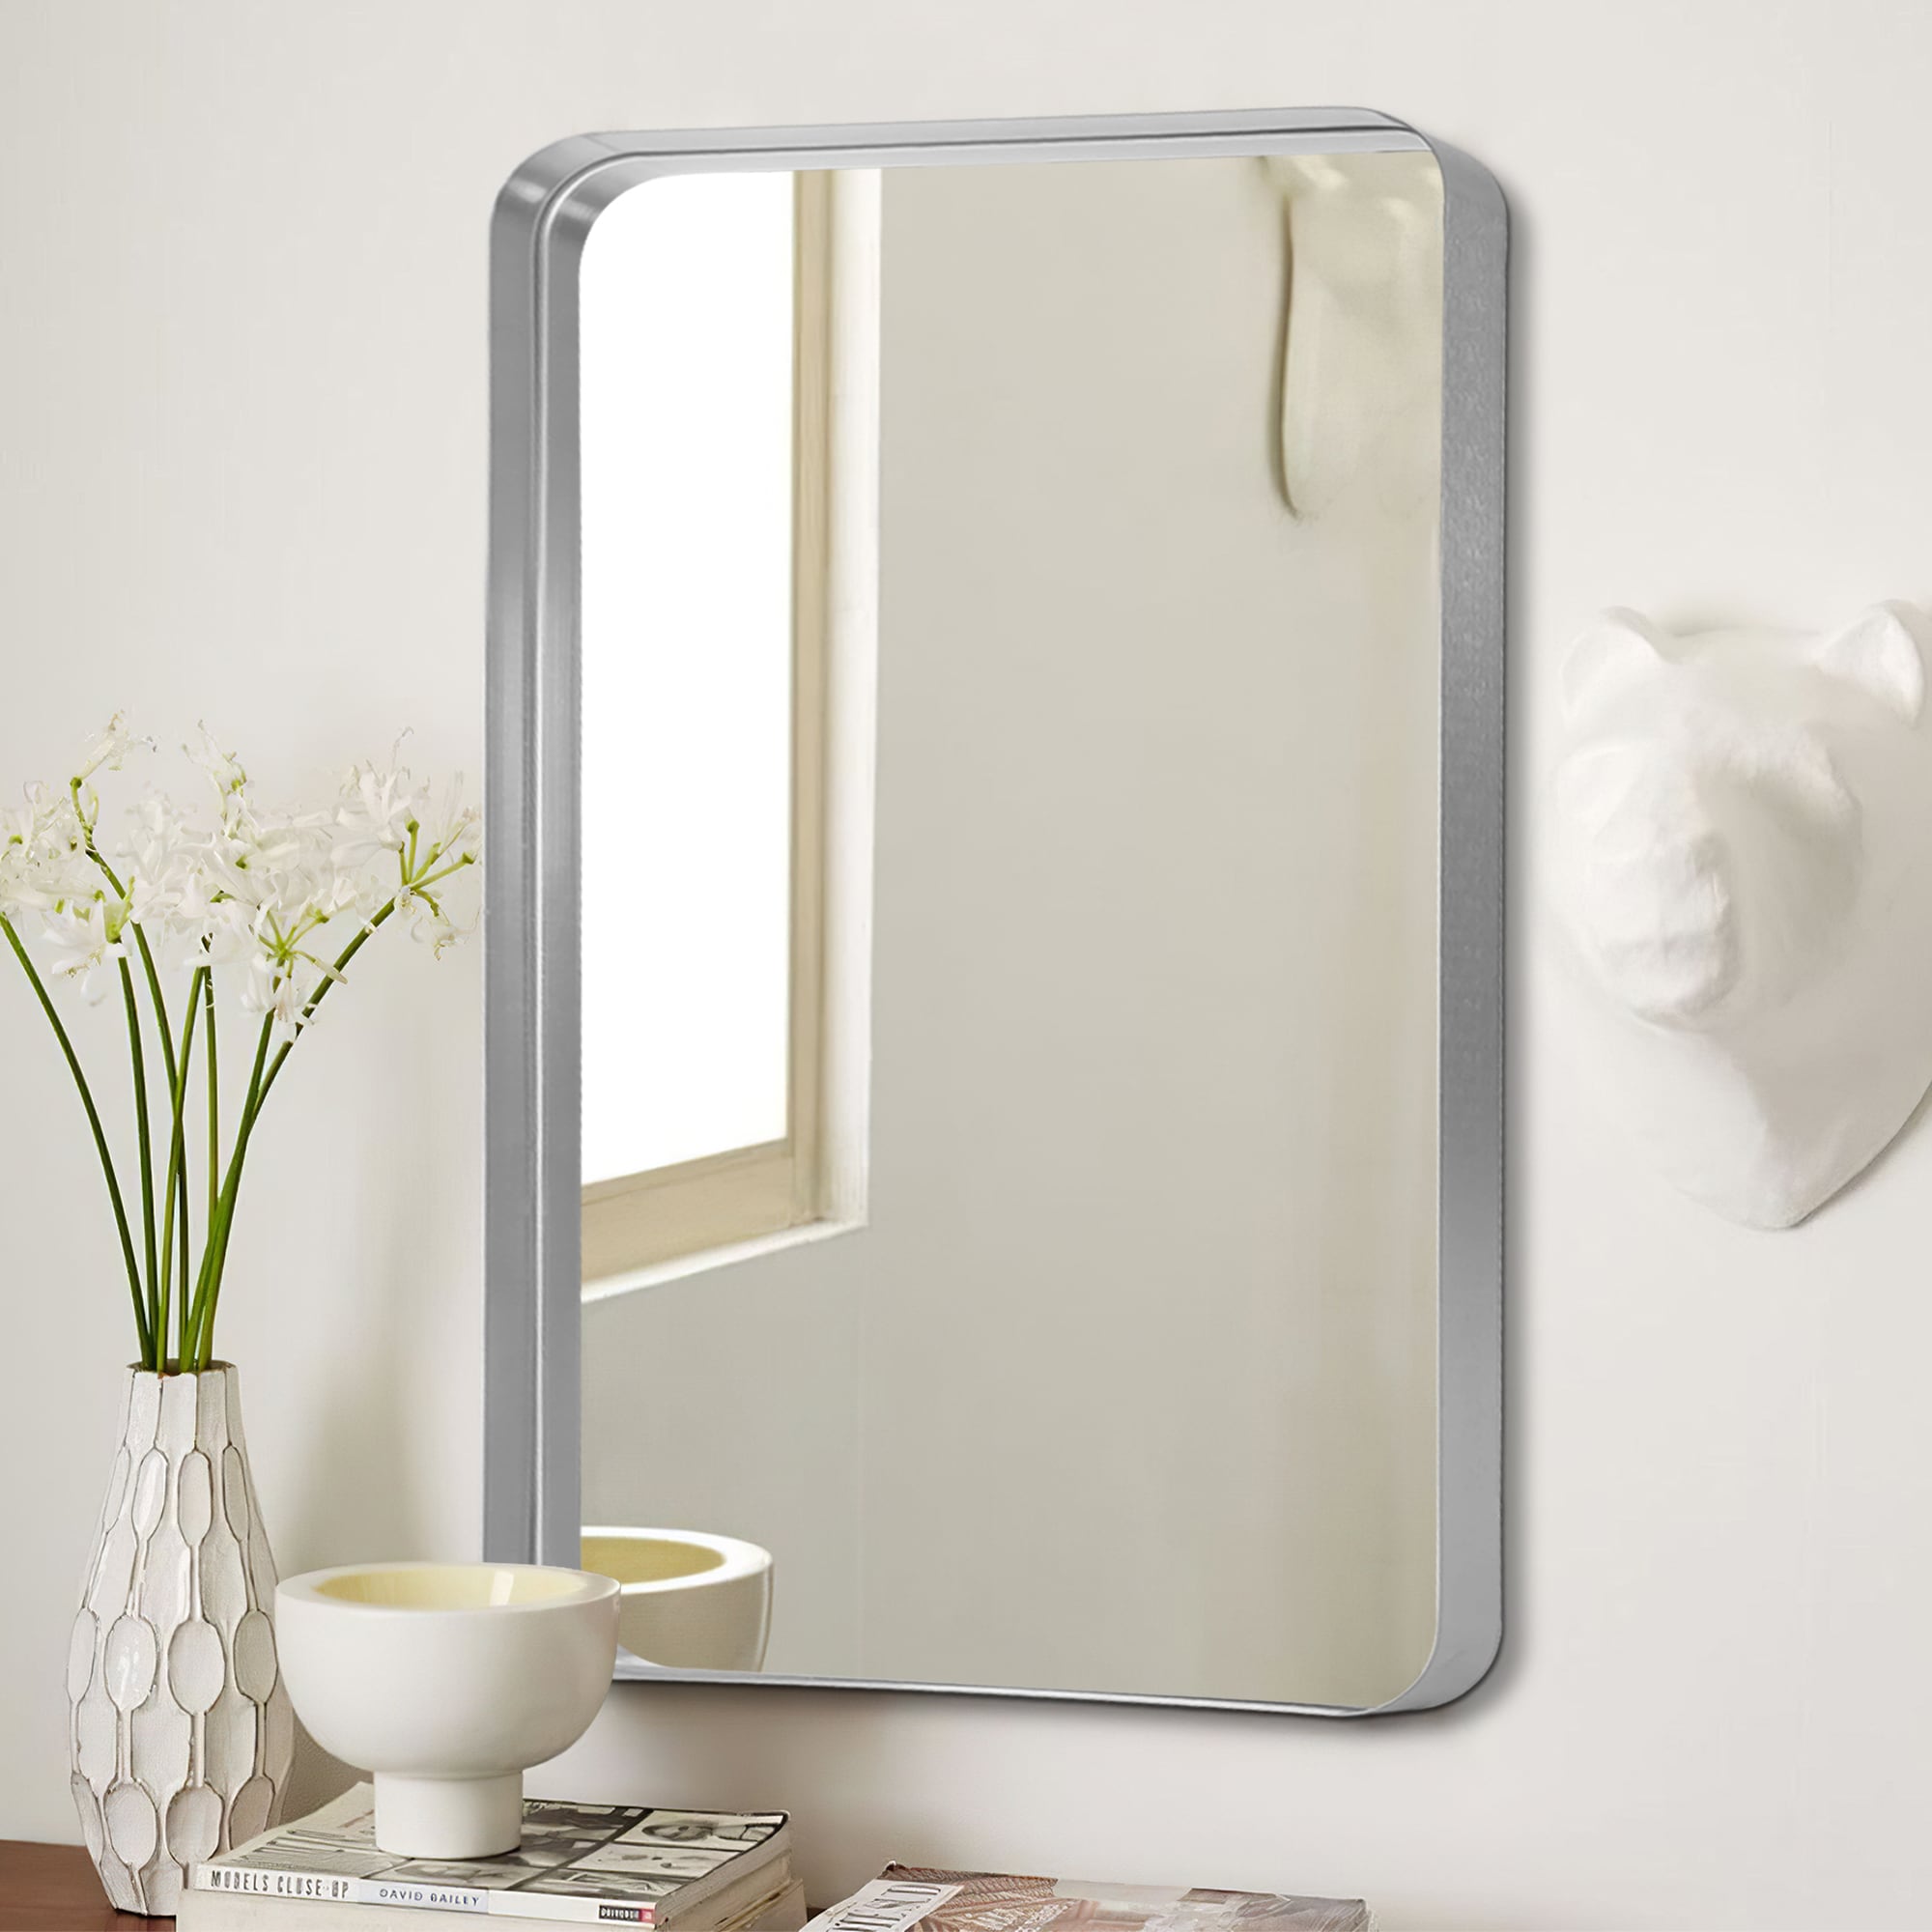 NeuType 28 inch Round Mirror Circle Mirrors , Gold , Wall Mounted Deep Set  Aluminum Alloy Frame for Bathroom, Living Room, Bedroom